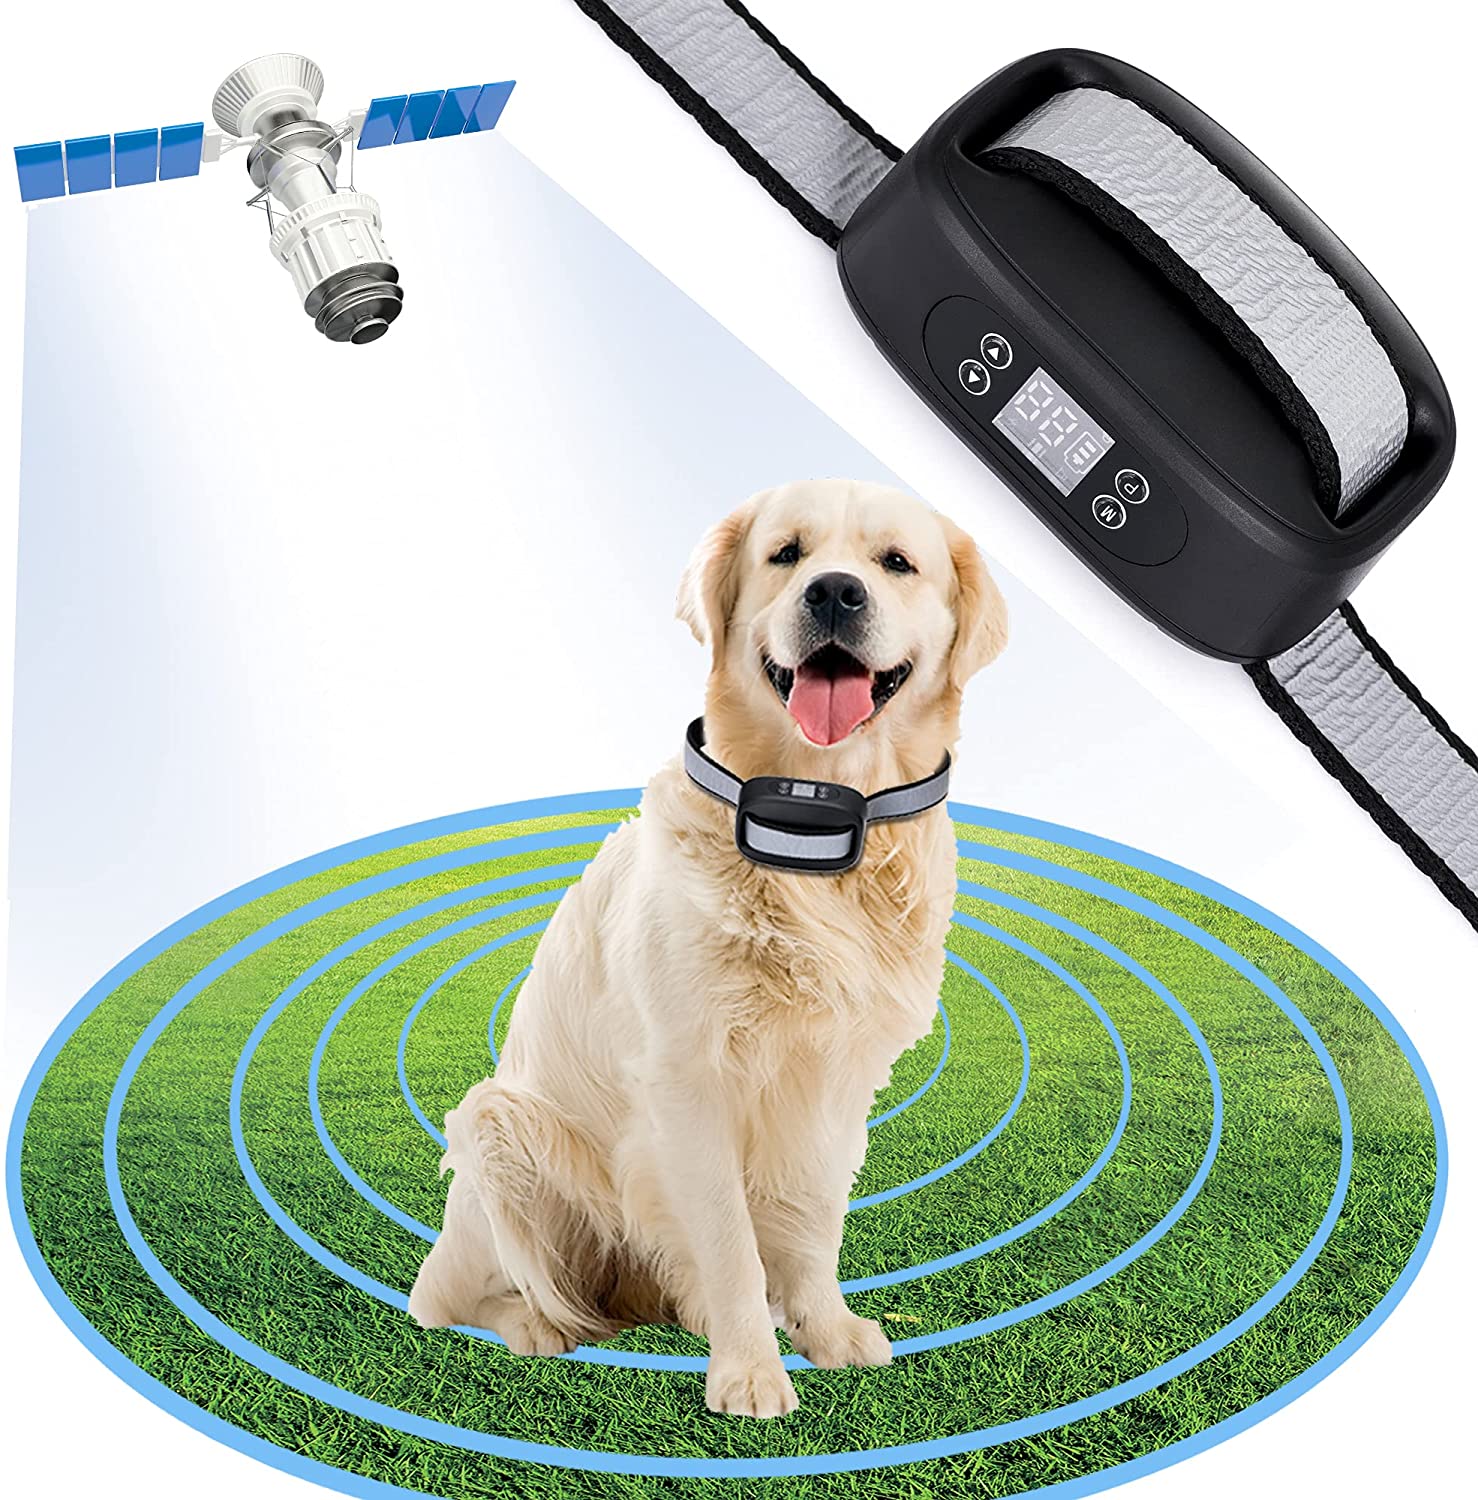 Popular Electric Fence For Dogs